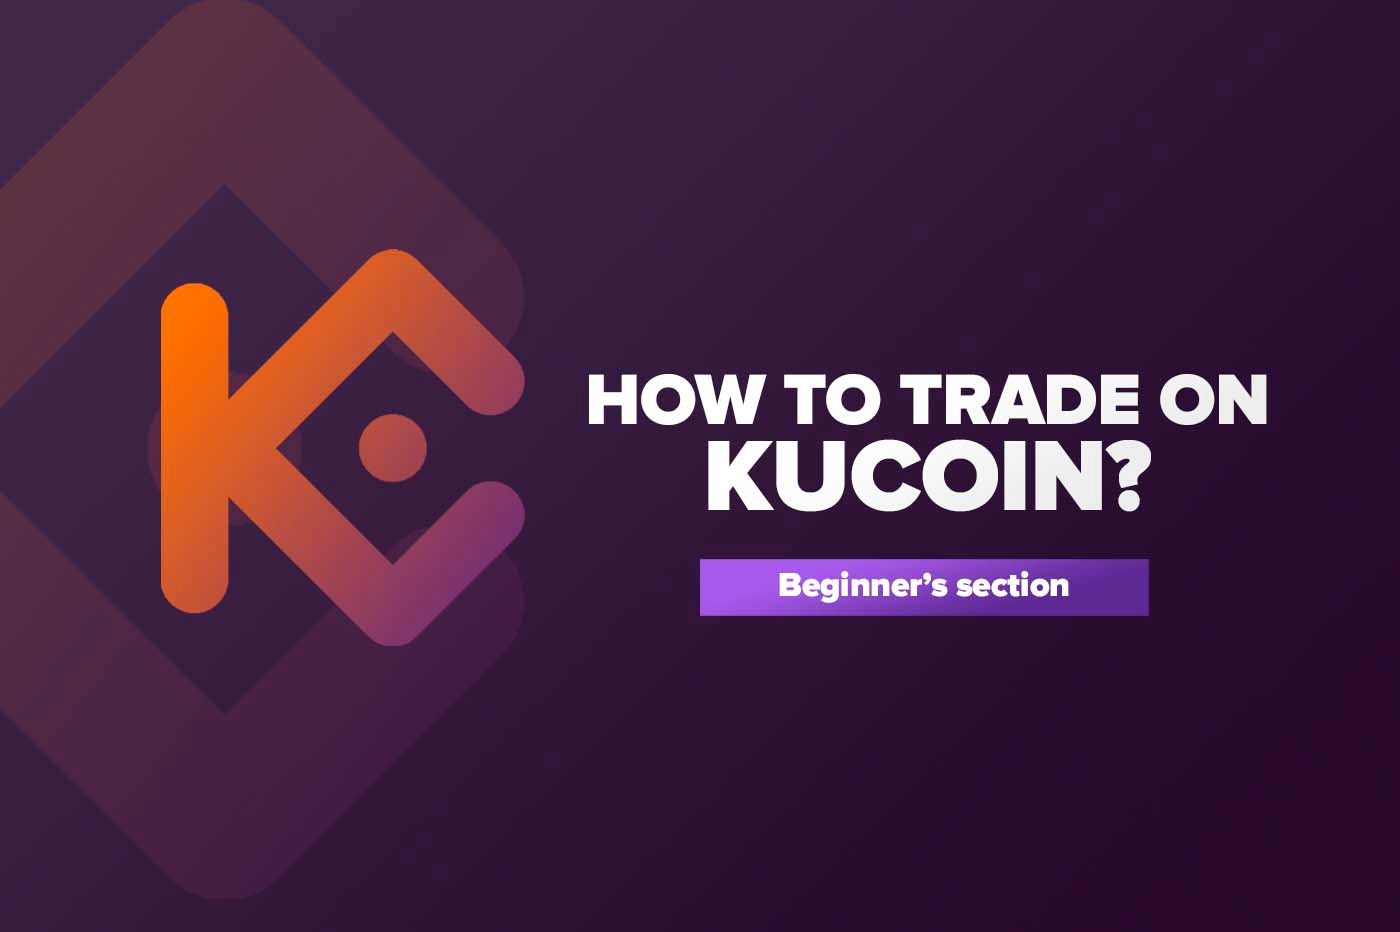 How to trade on KuCoin?